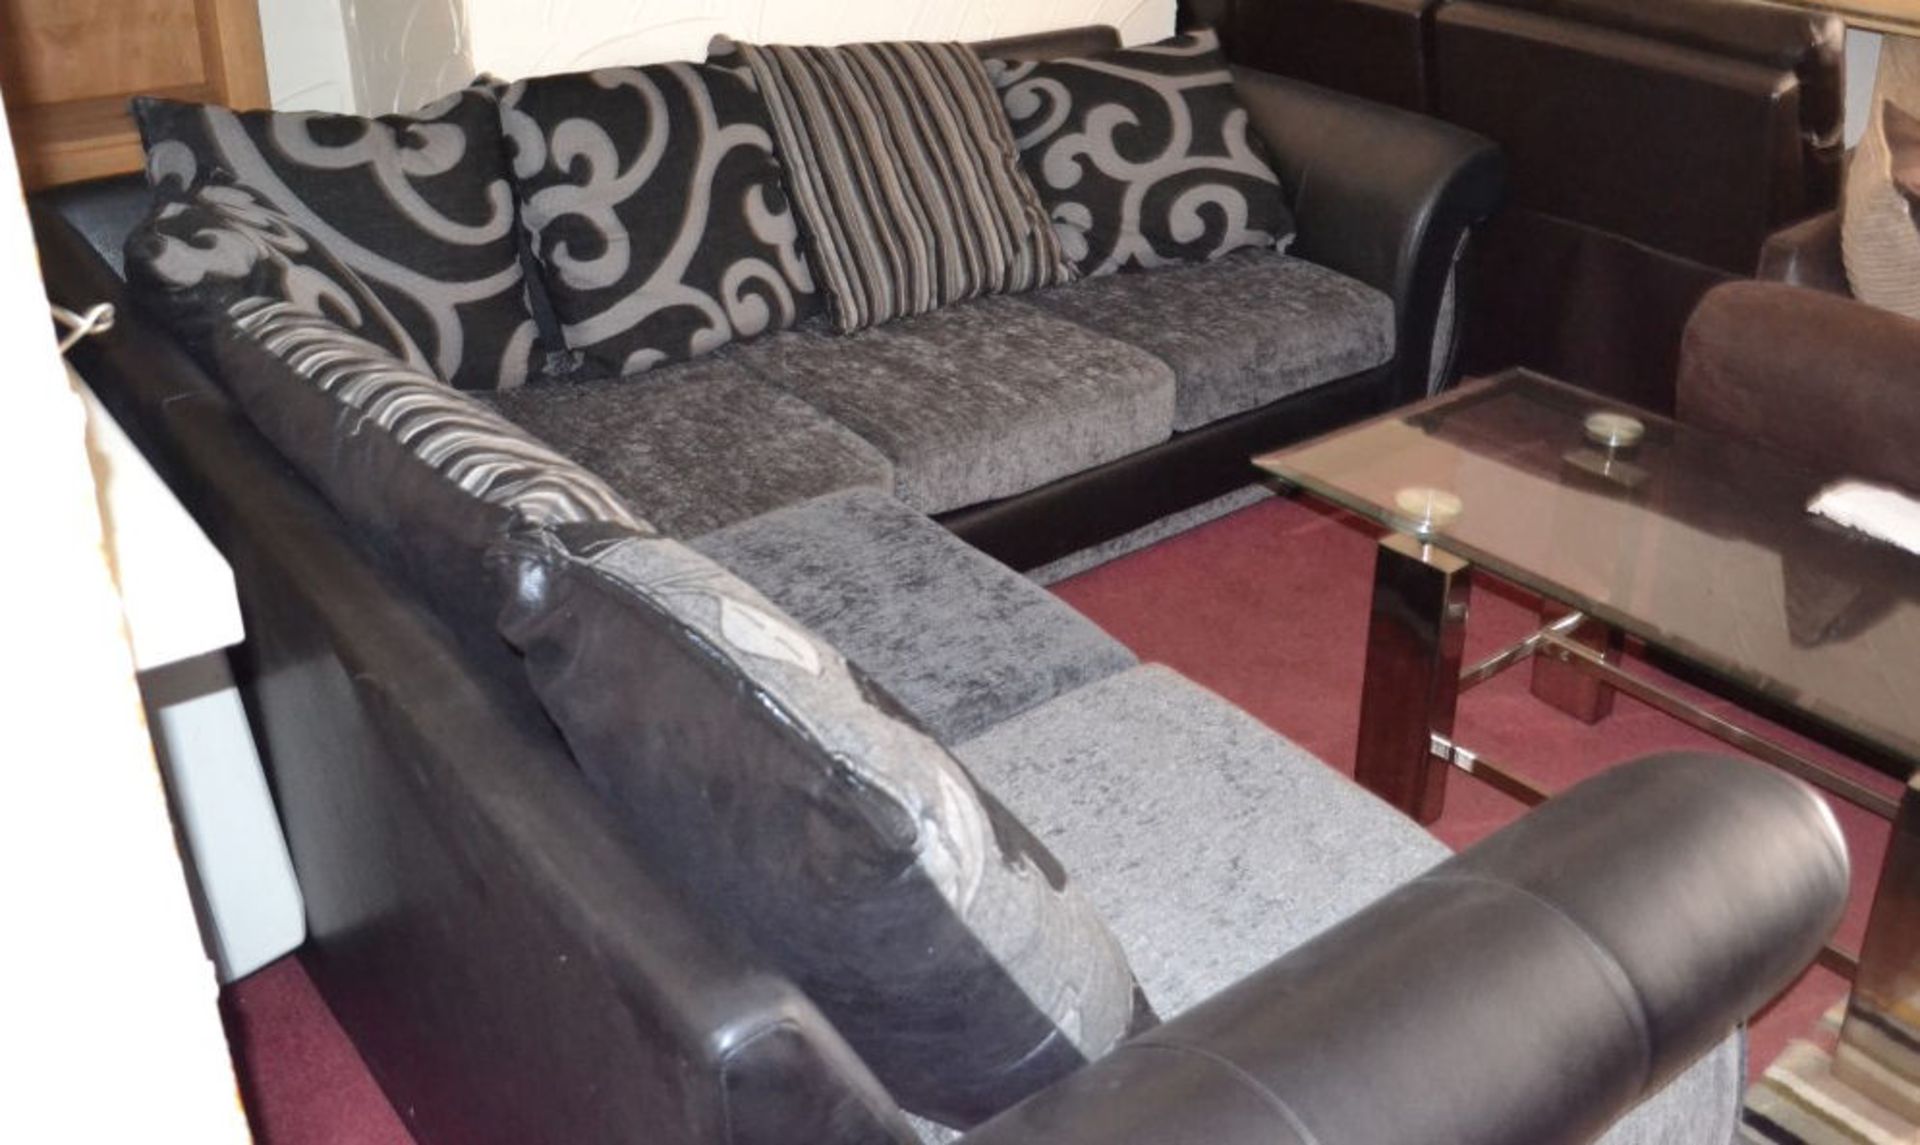 1 x Large Contemporary Leather & Fabric Corner Sofa In Grey & Black - Image 2 of 4